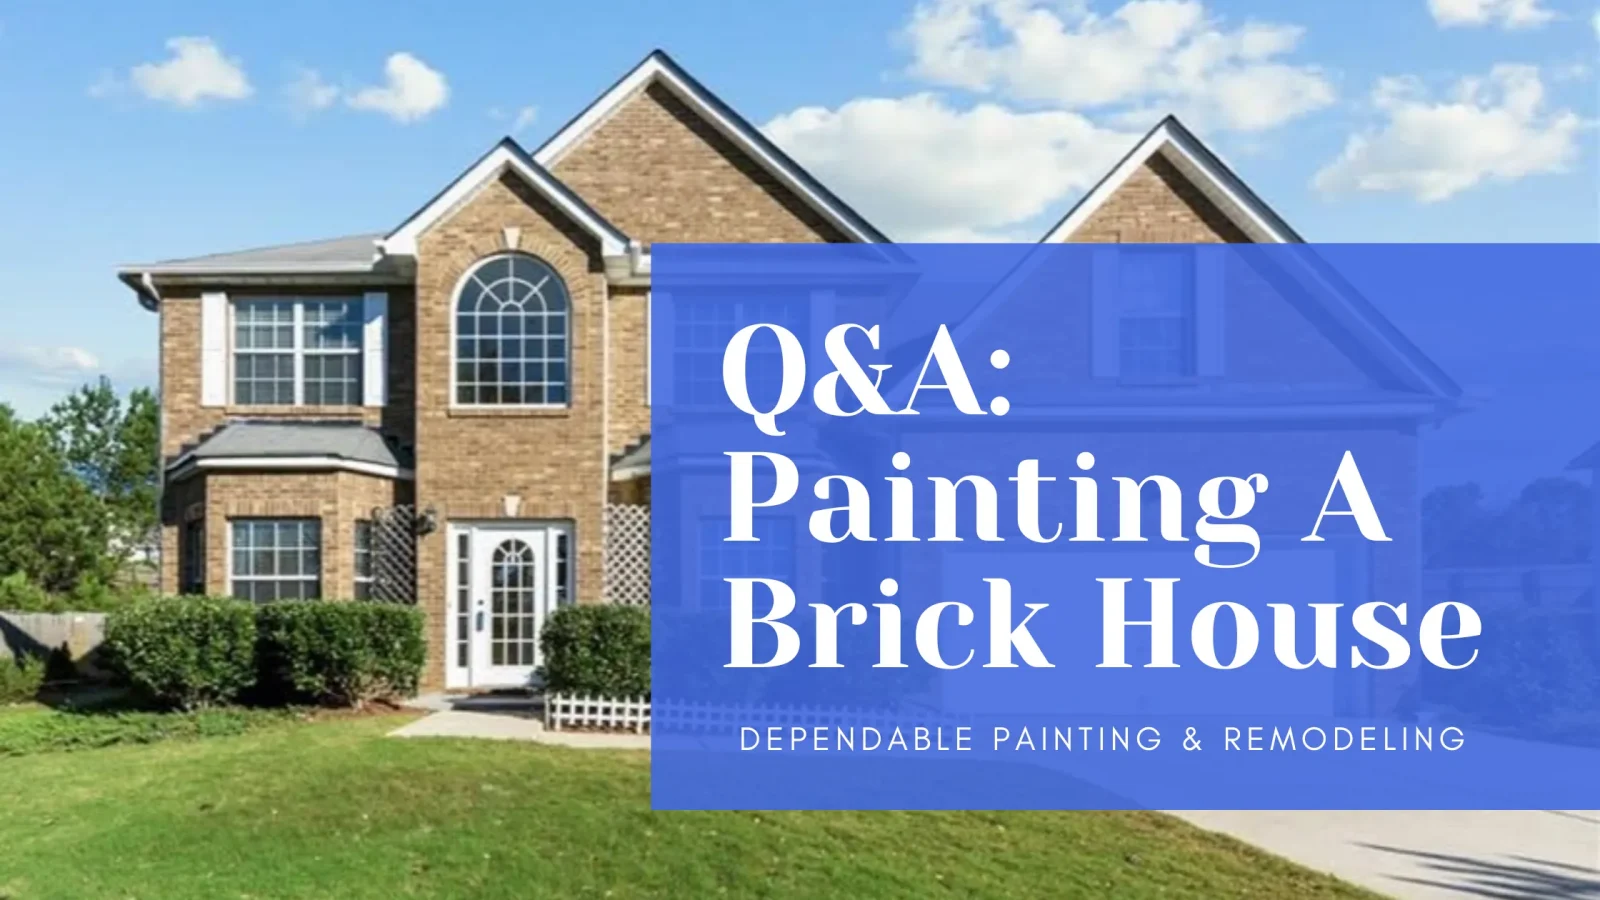 Painting a Brick House